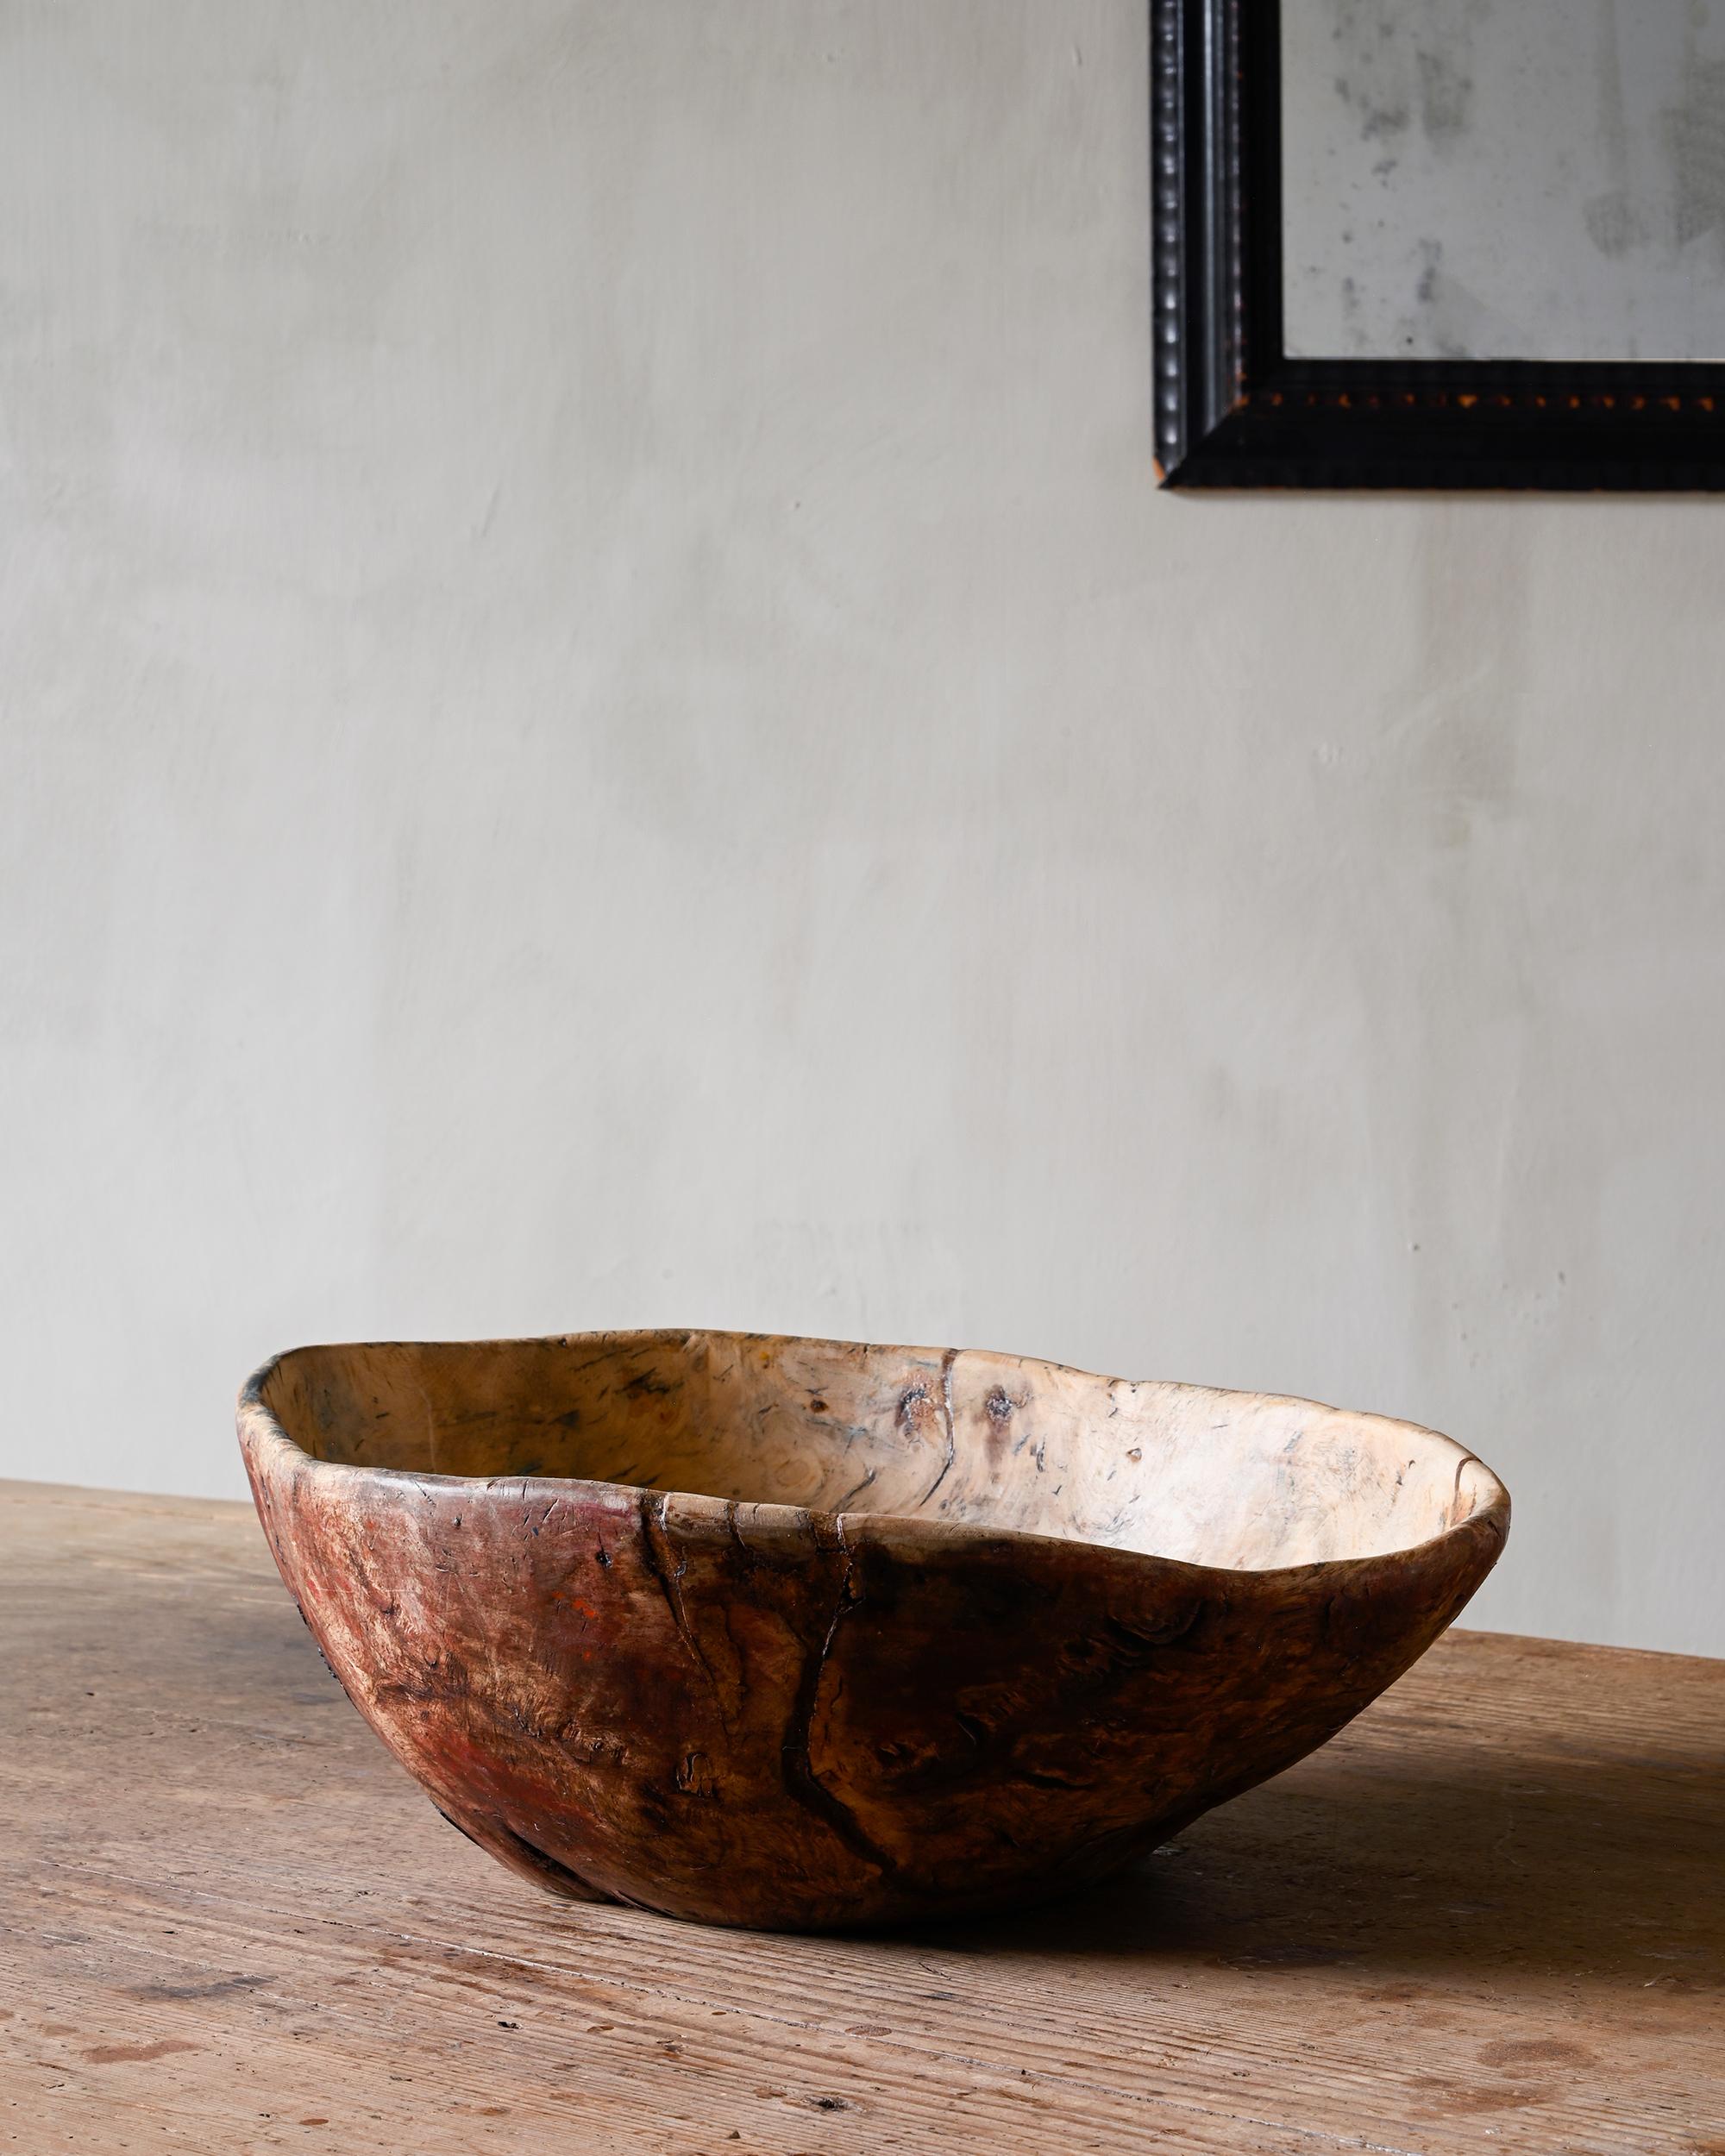 Fine organic late 18th century Swedish / Scandinavian folk art root wood bowl in it's original finish, great patination and an skilfully executed brass repair. Ca 1790.